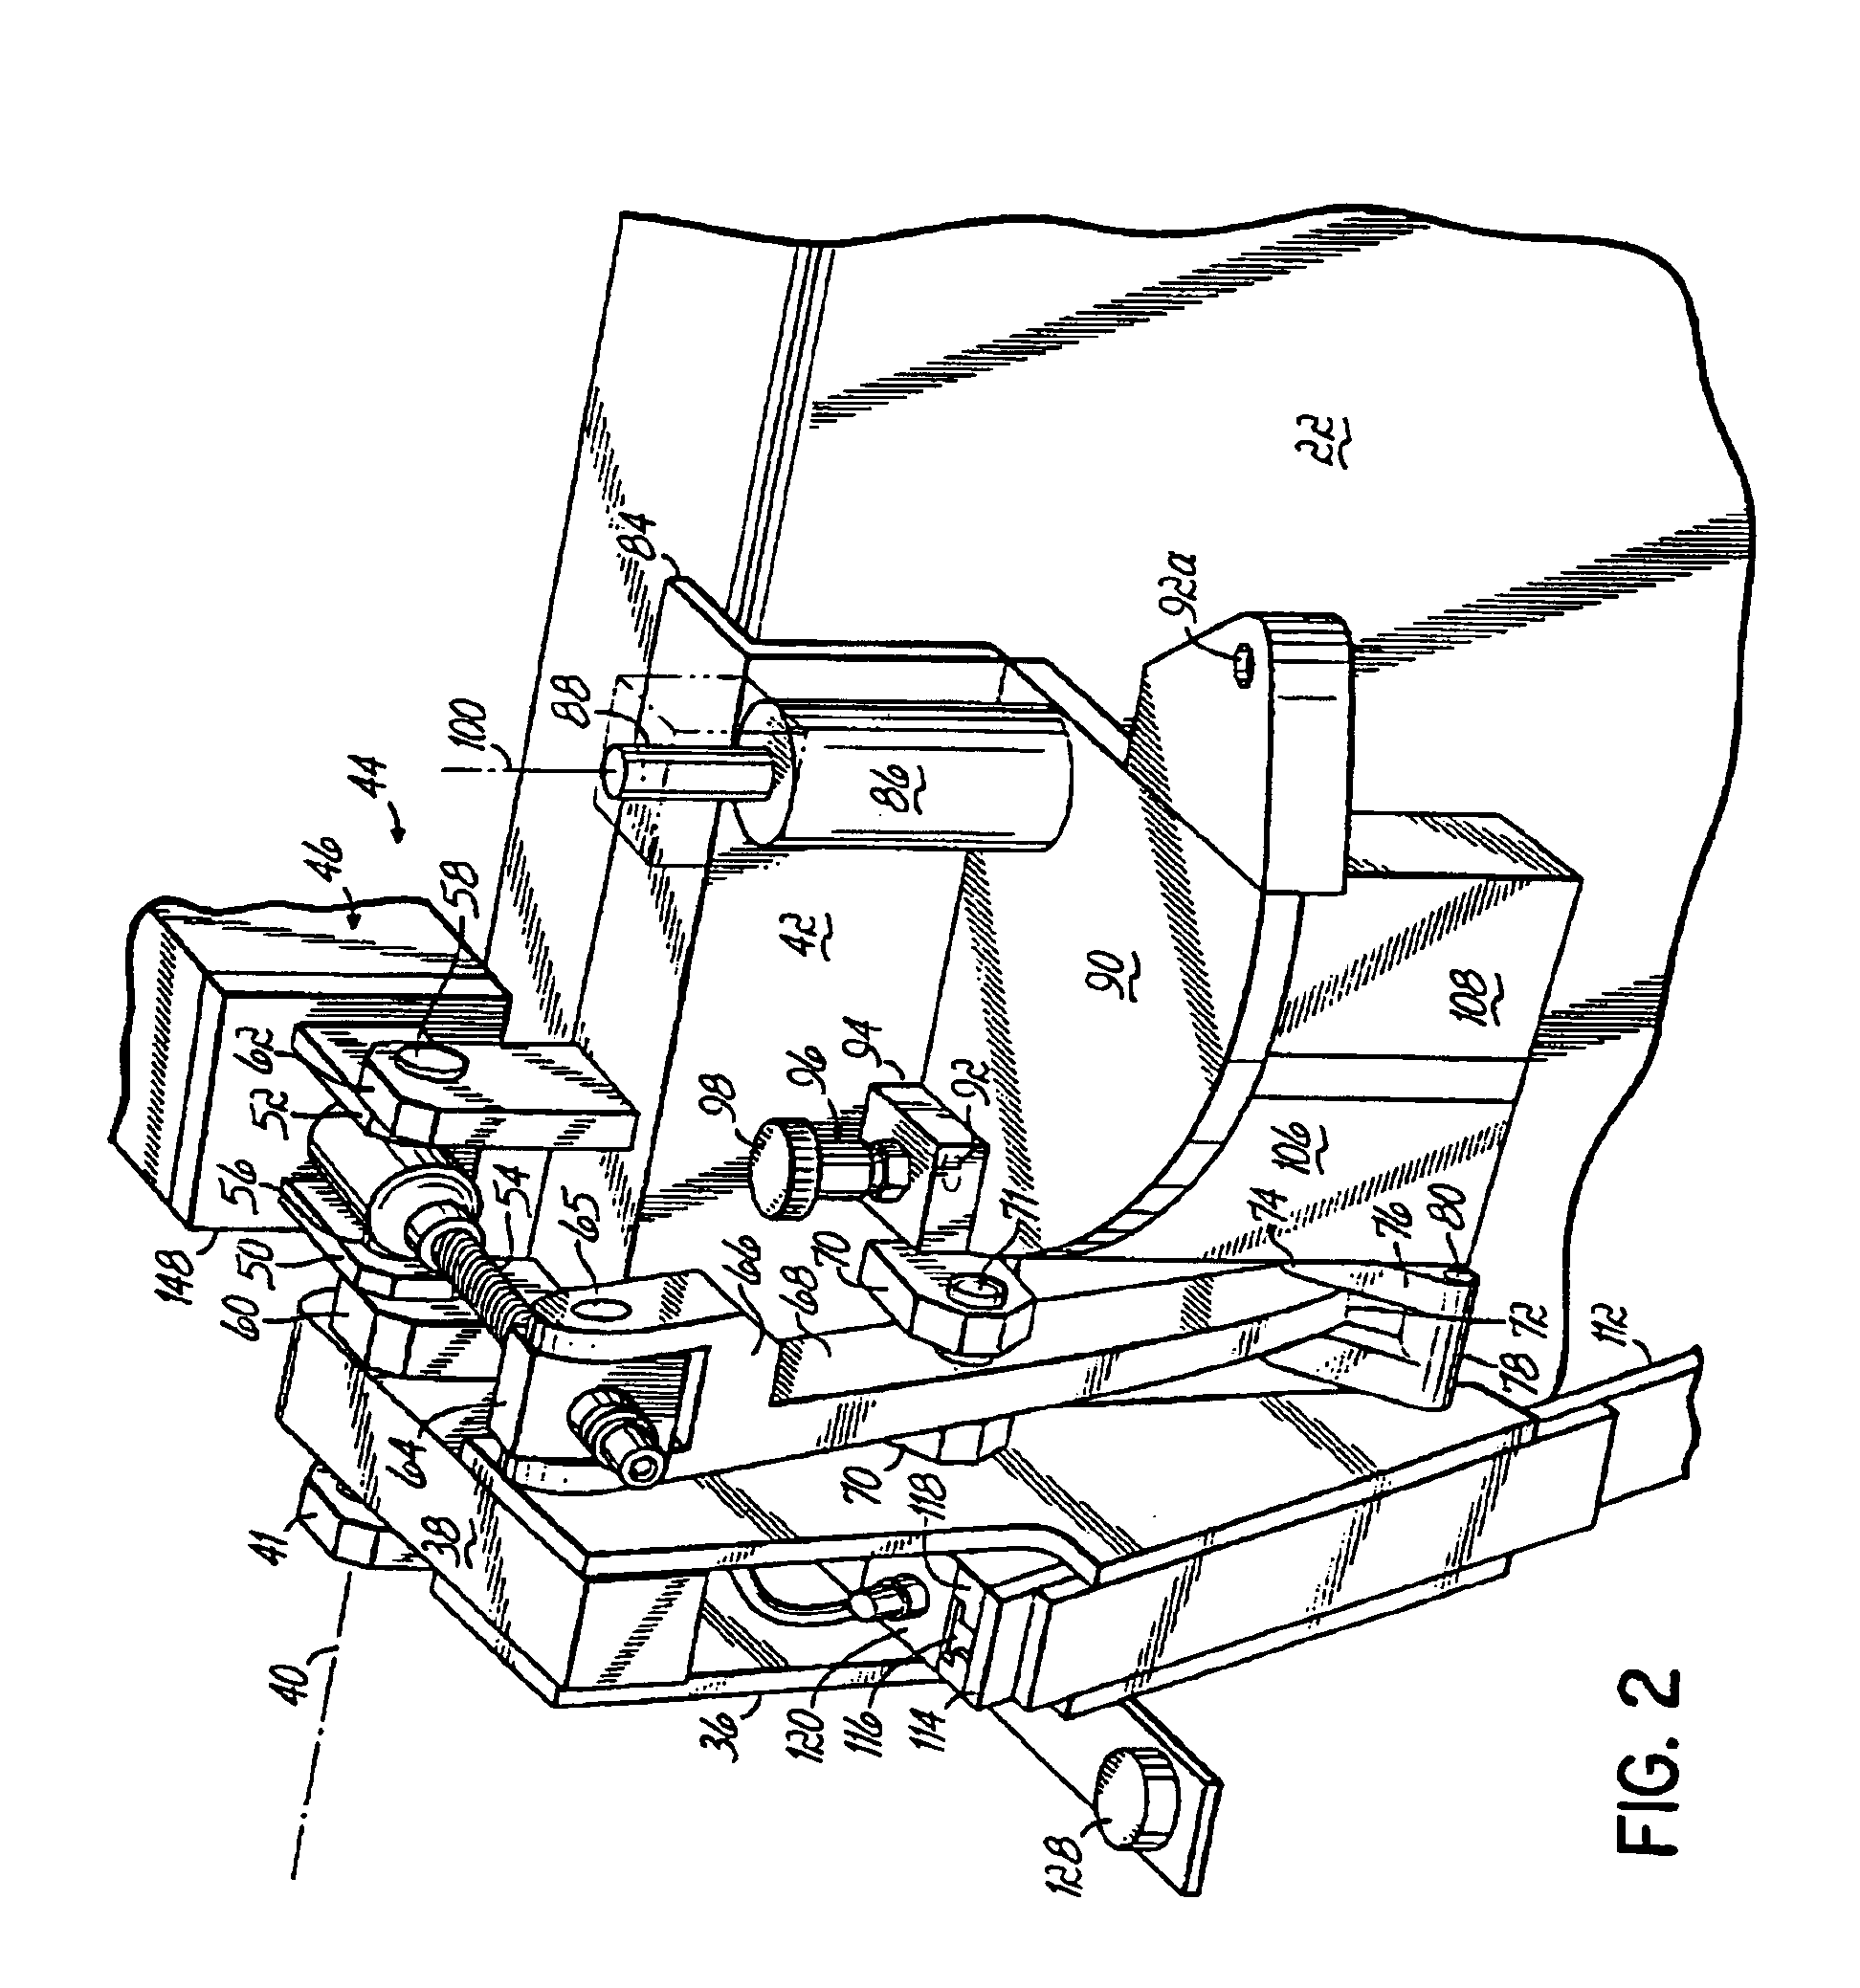 Programmable tucking attachment for a sewing machine and method